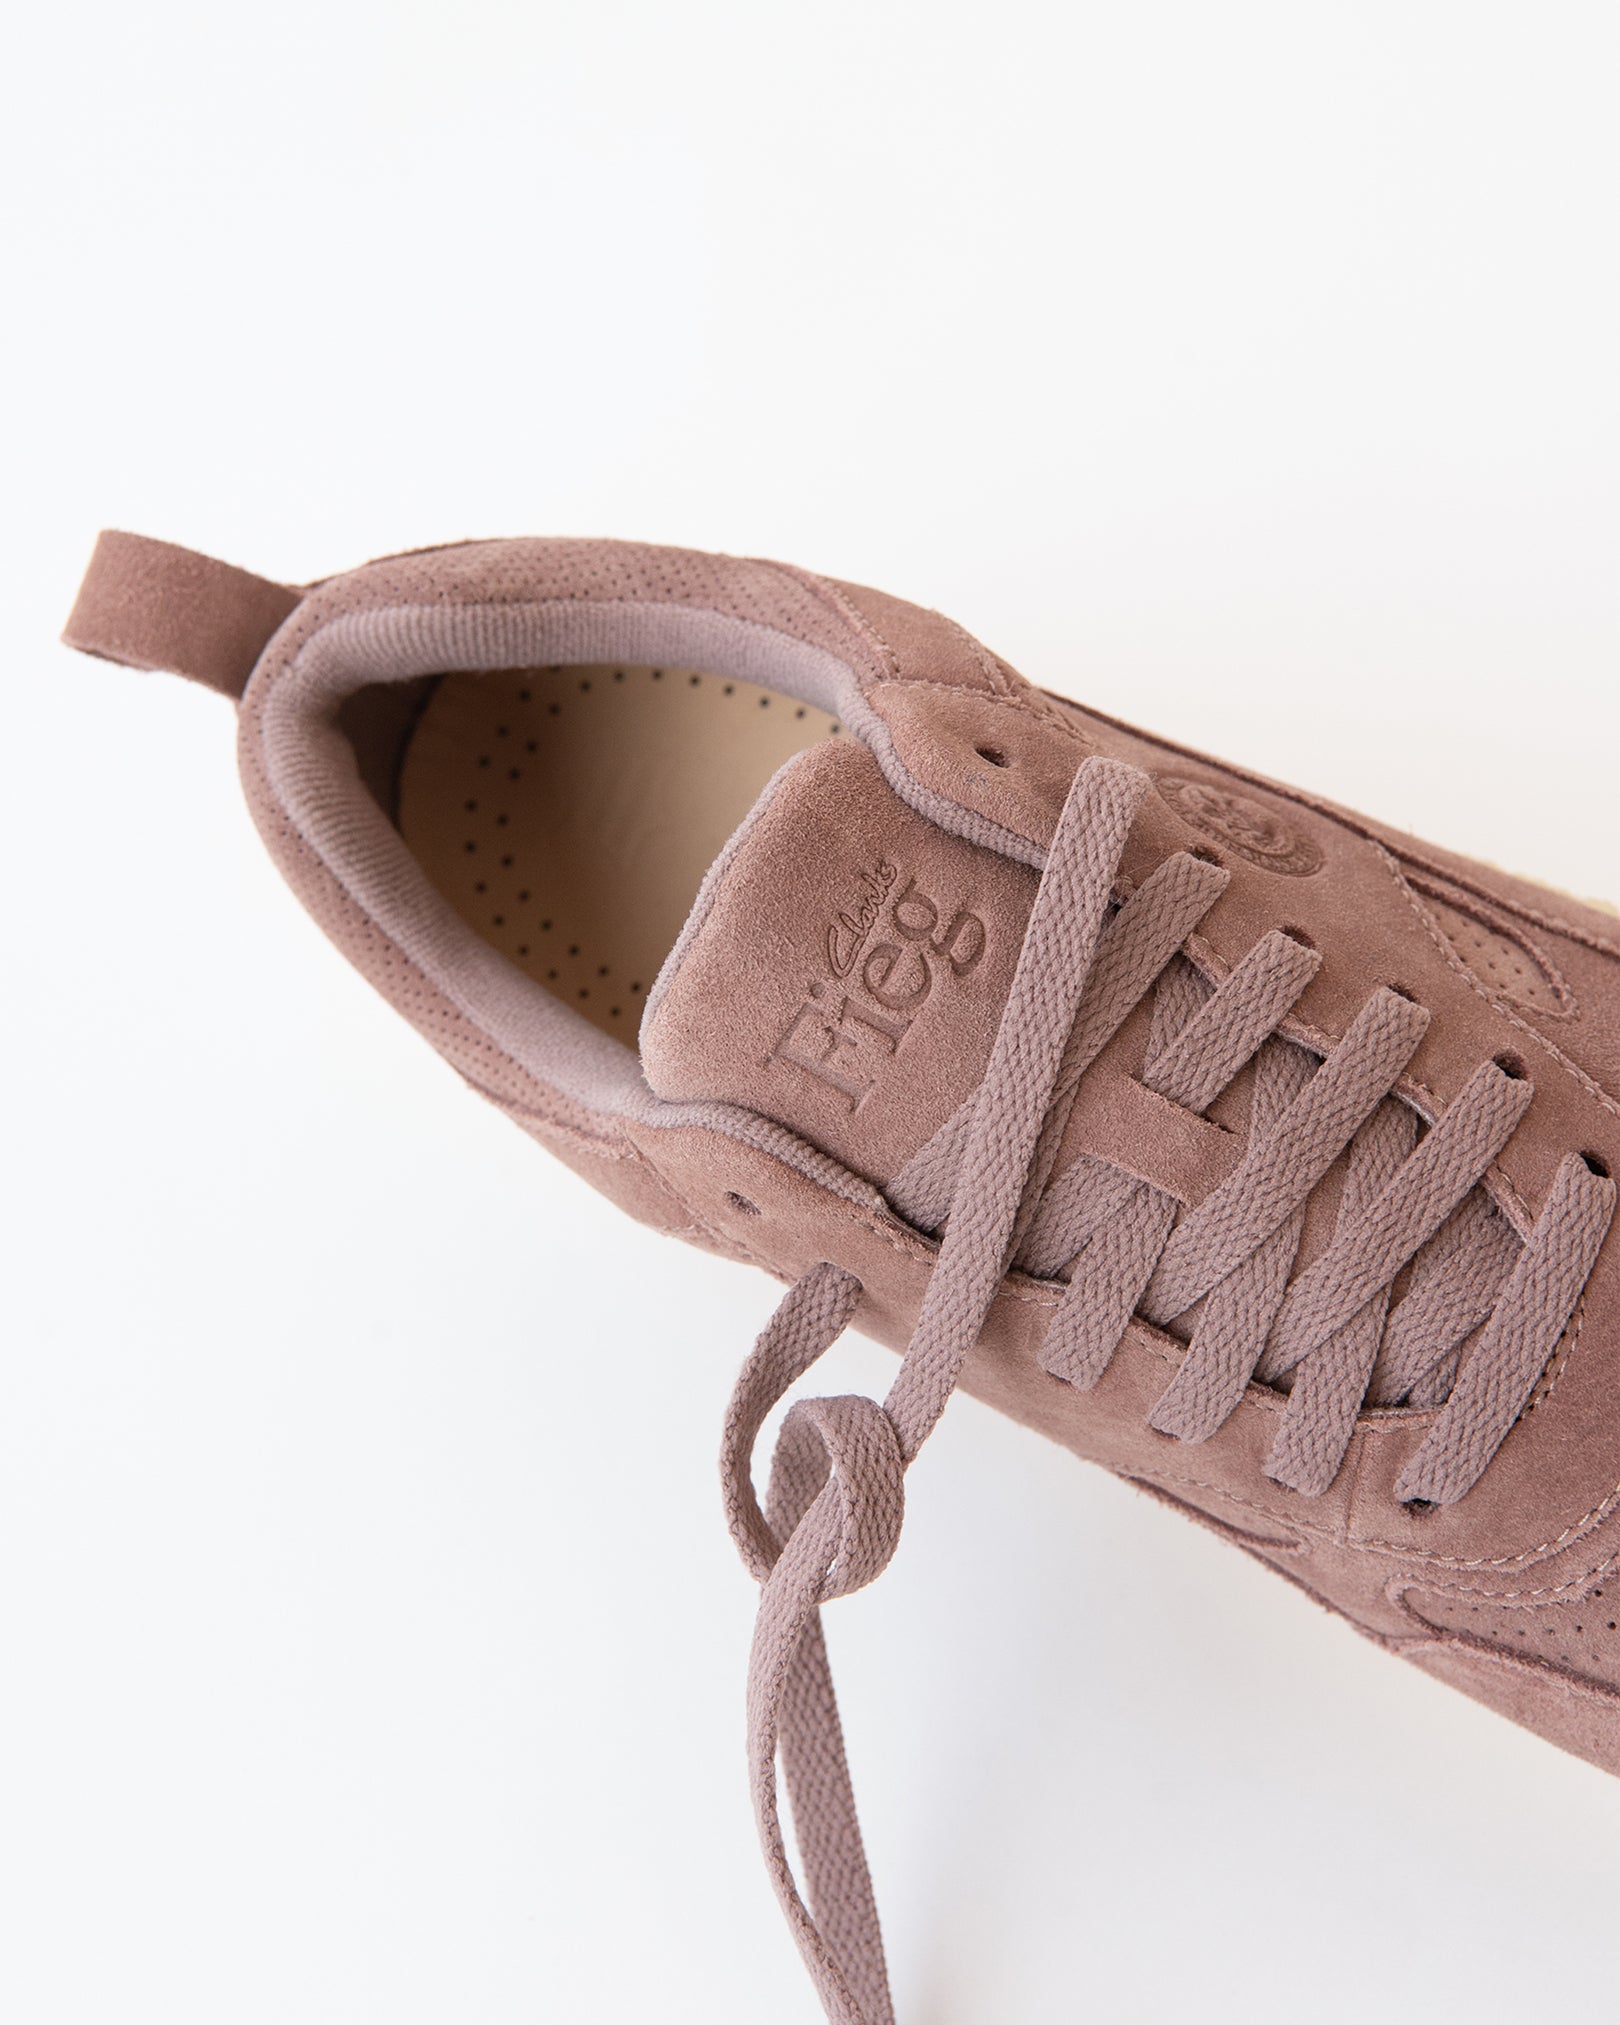 8th St by Ronnie Fieg for Clarks Originals – Kith